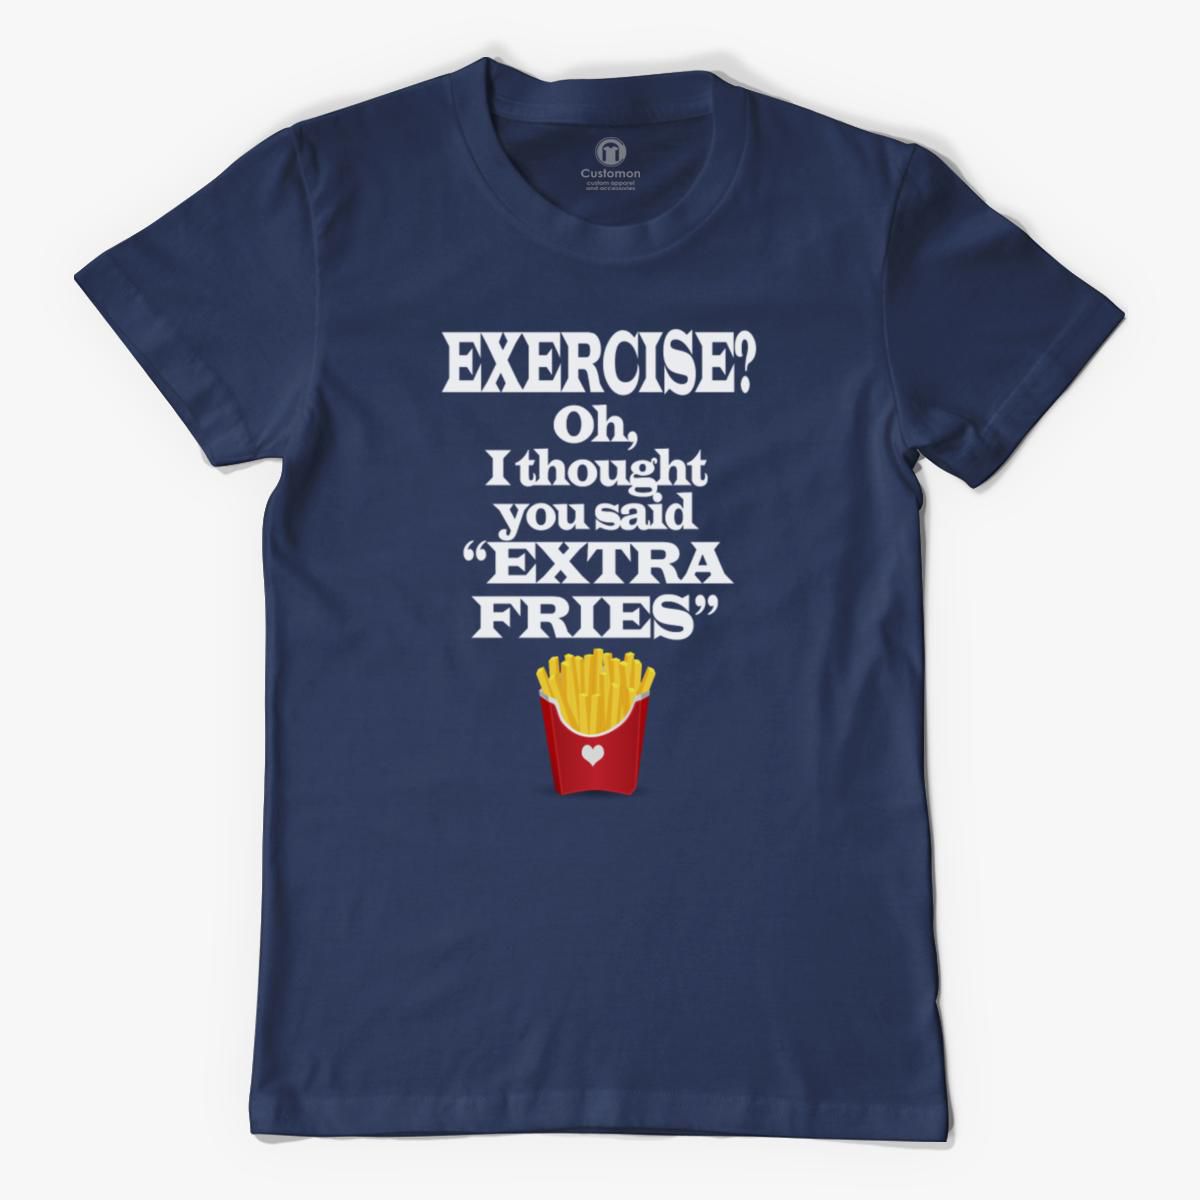  T Shirt To Workout Shirt for Fat Body